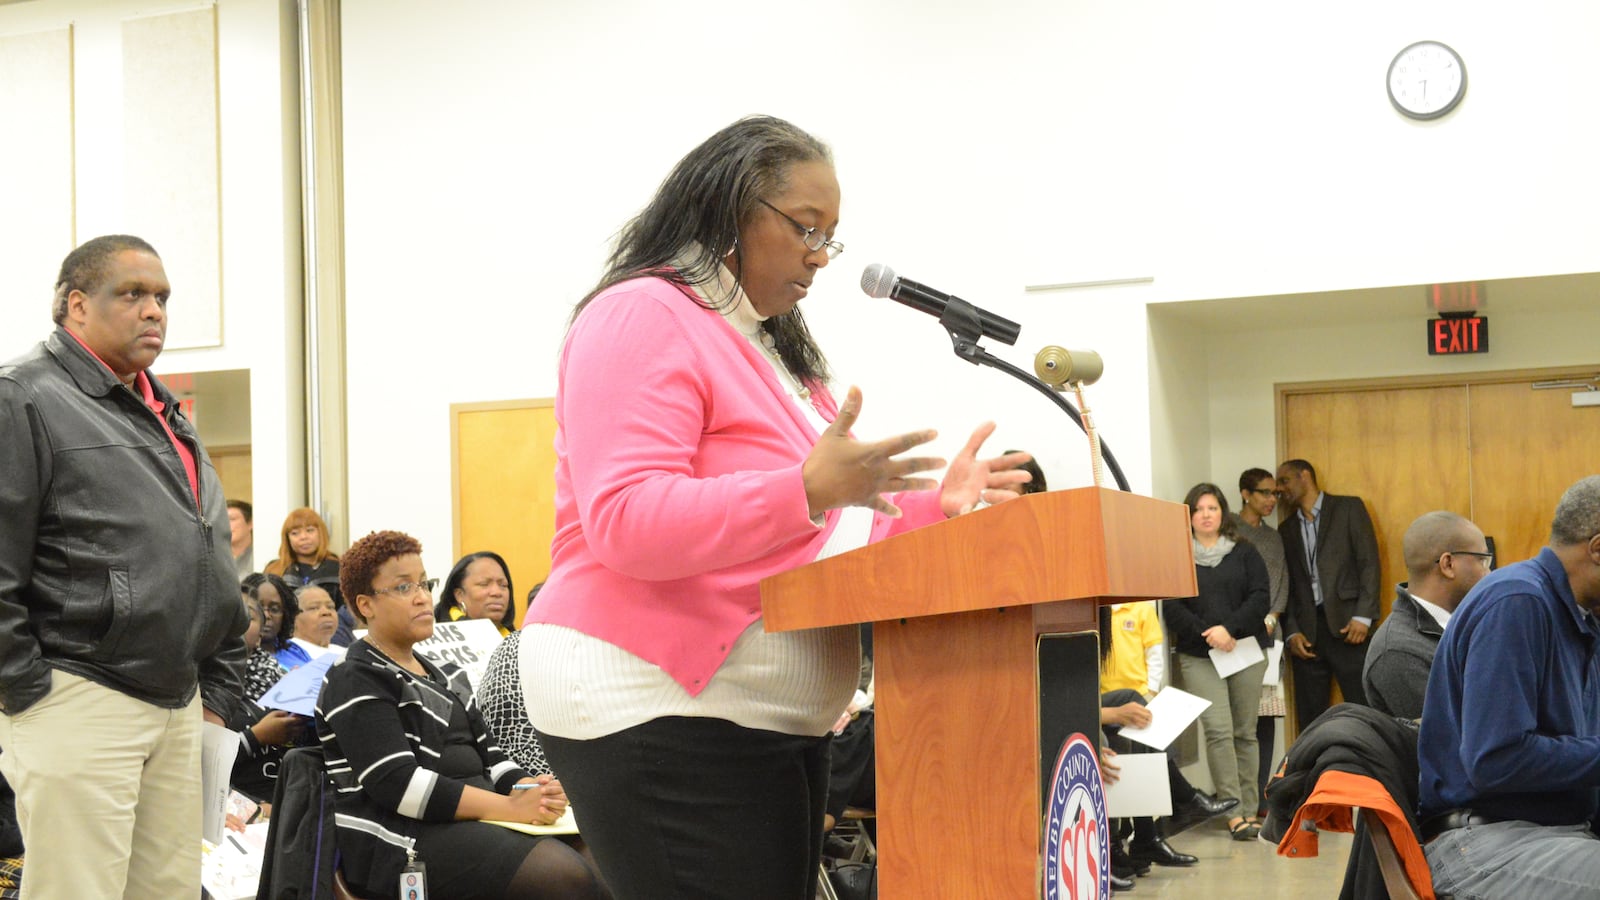 Parent Juanita Patton was one of several charter school supporters to testify in favor of a collaboration agreement between Shelby County Schools and Memphis's charter sector during a board meeting Tuesday. The Shelby County Schools board approved the agreement.